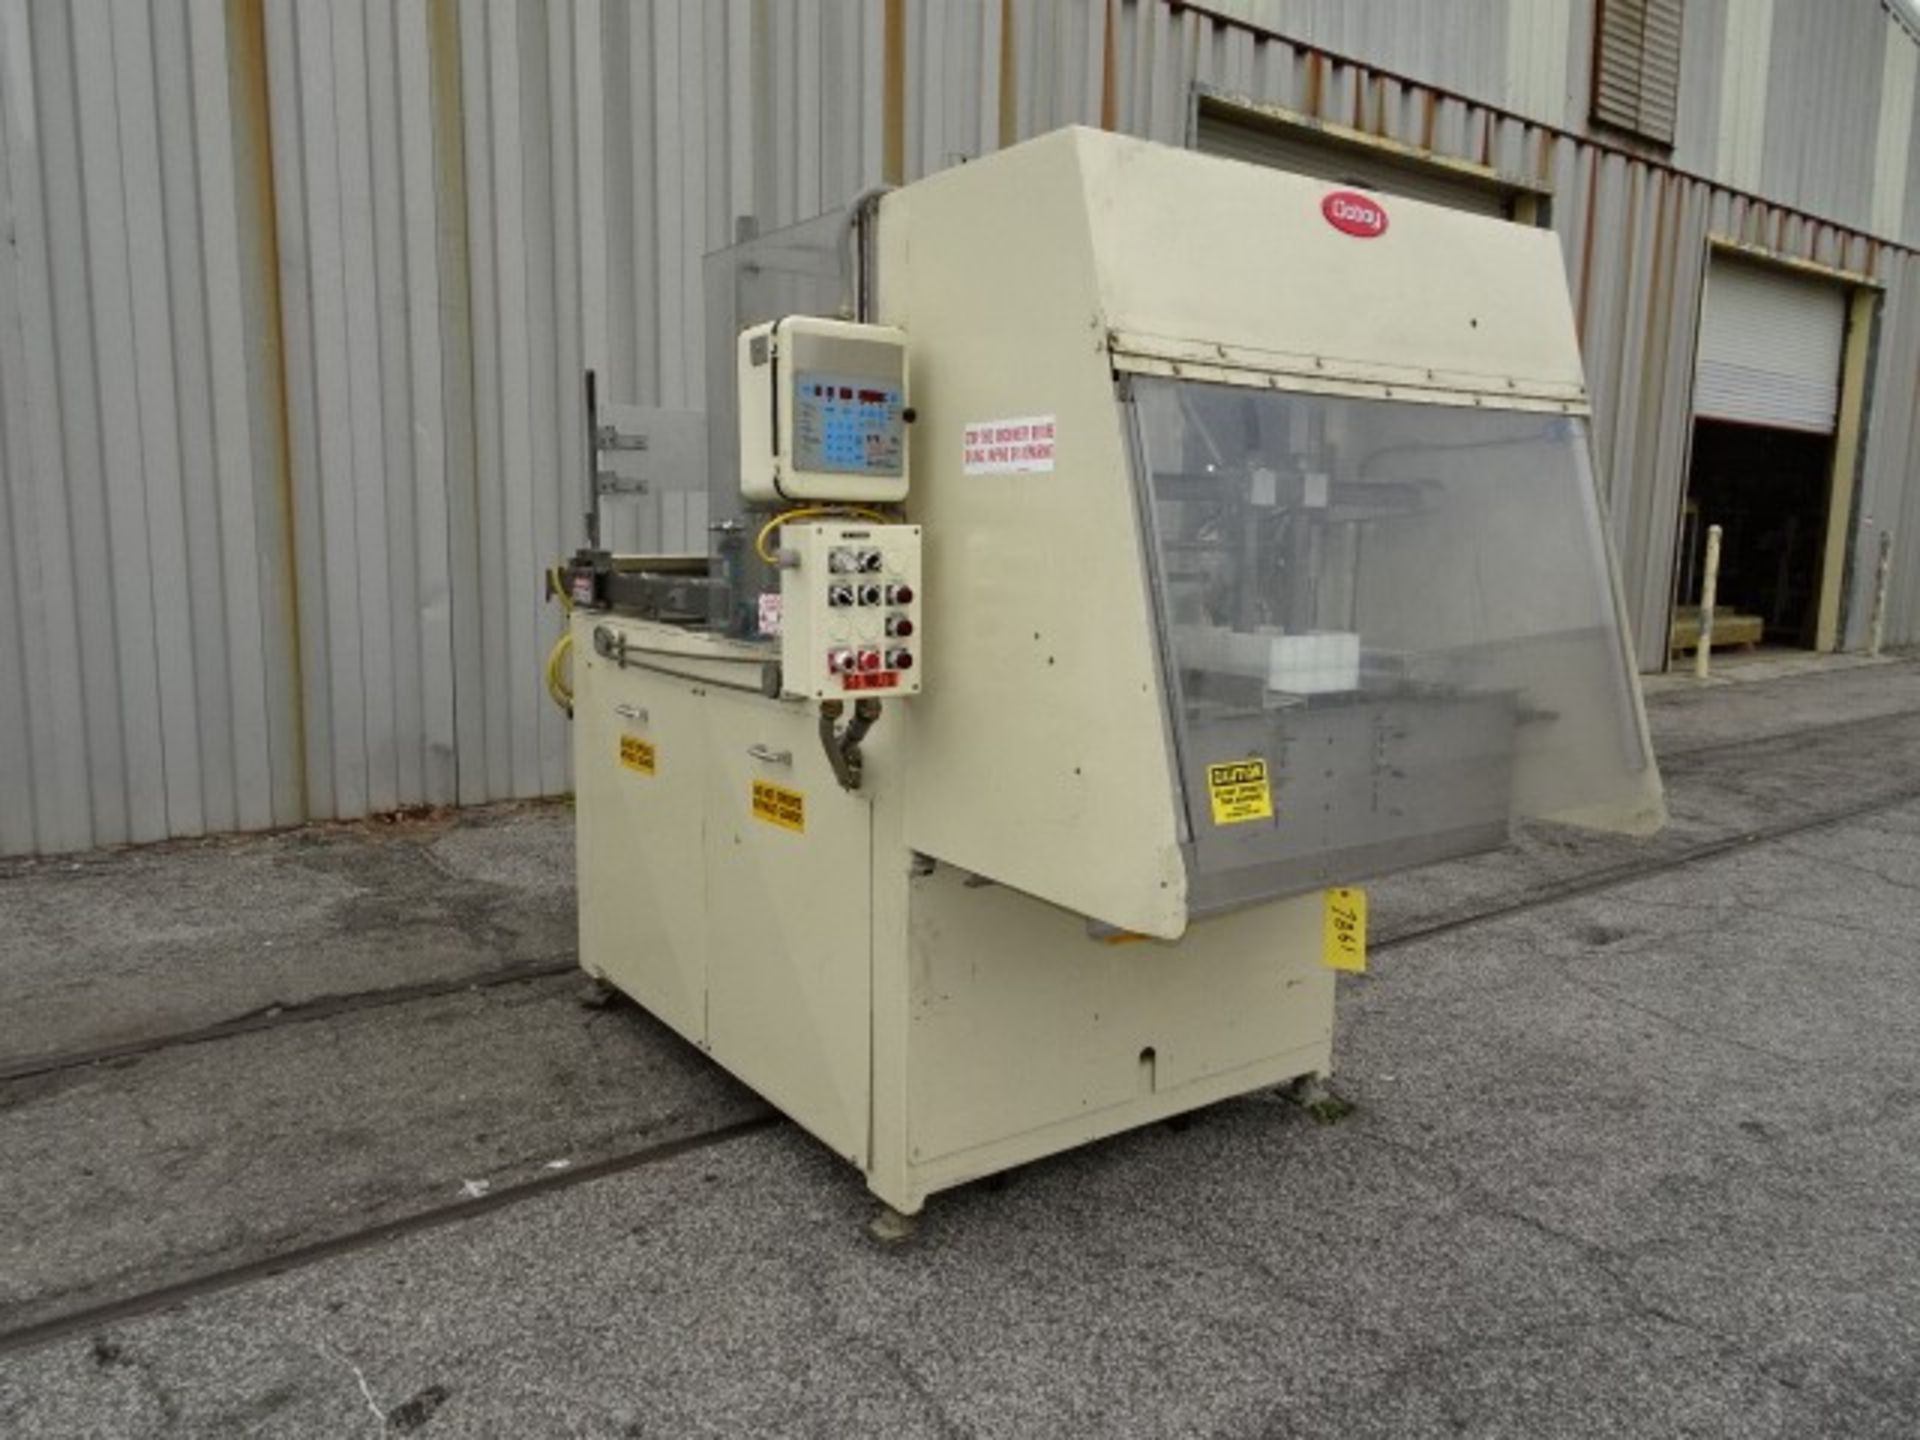 DOBOY 751 BII Tray Former with Nordson 3400 Hot Melt Glue (Located Charleston, SC) (385) - Image 4 of 4